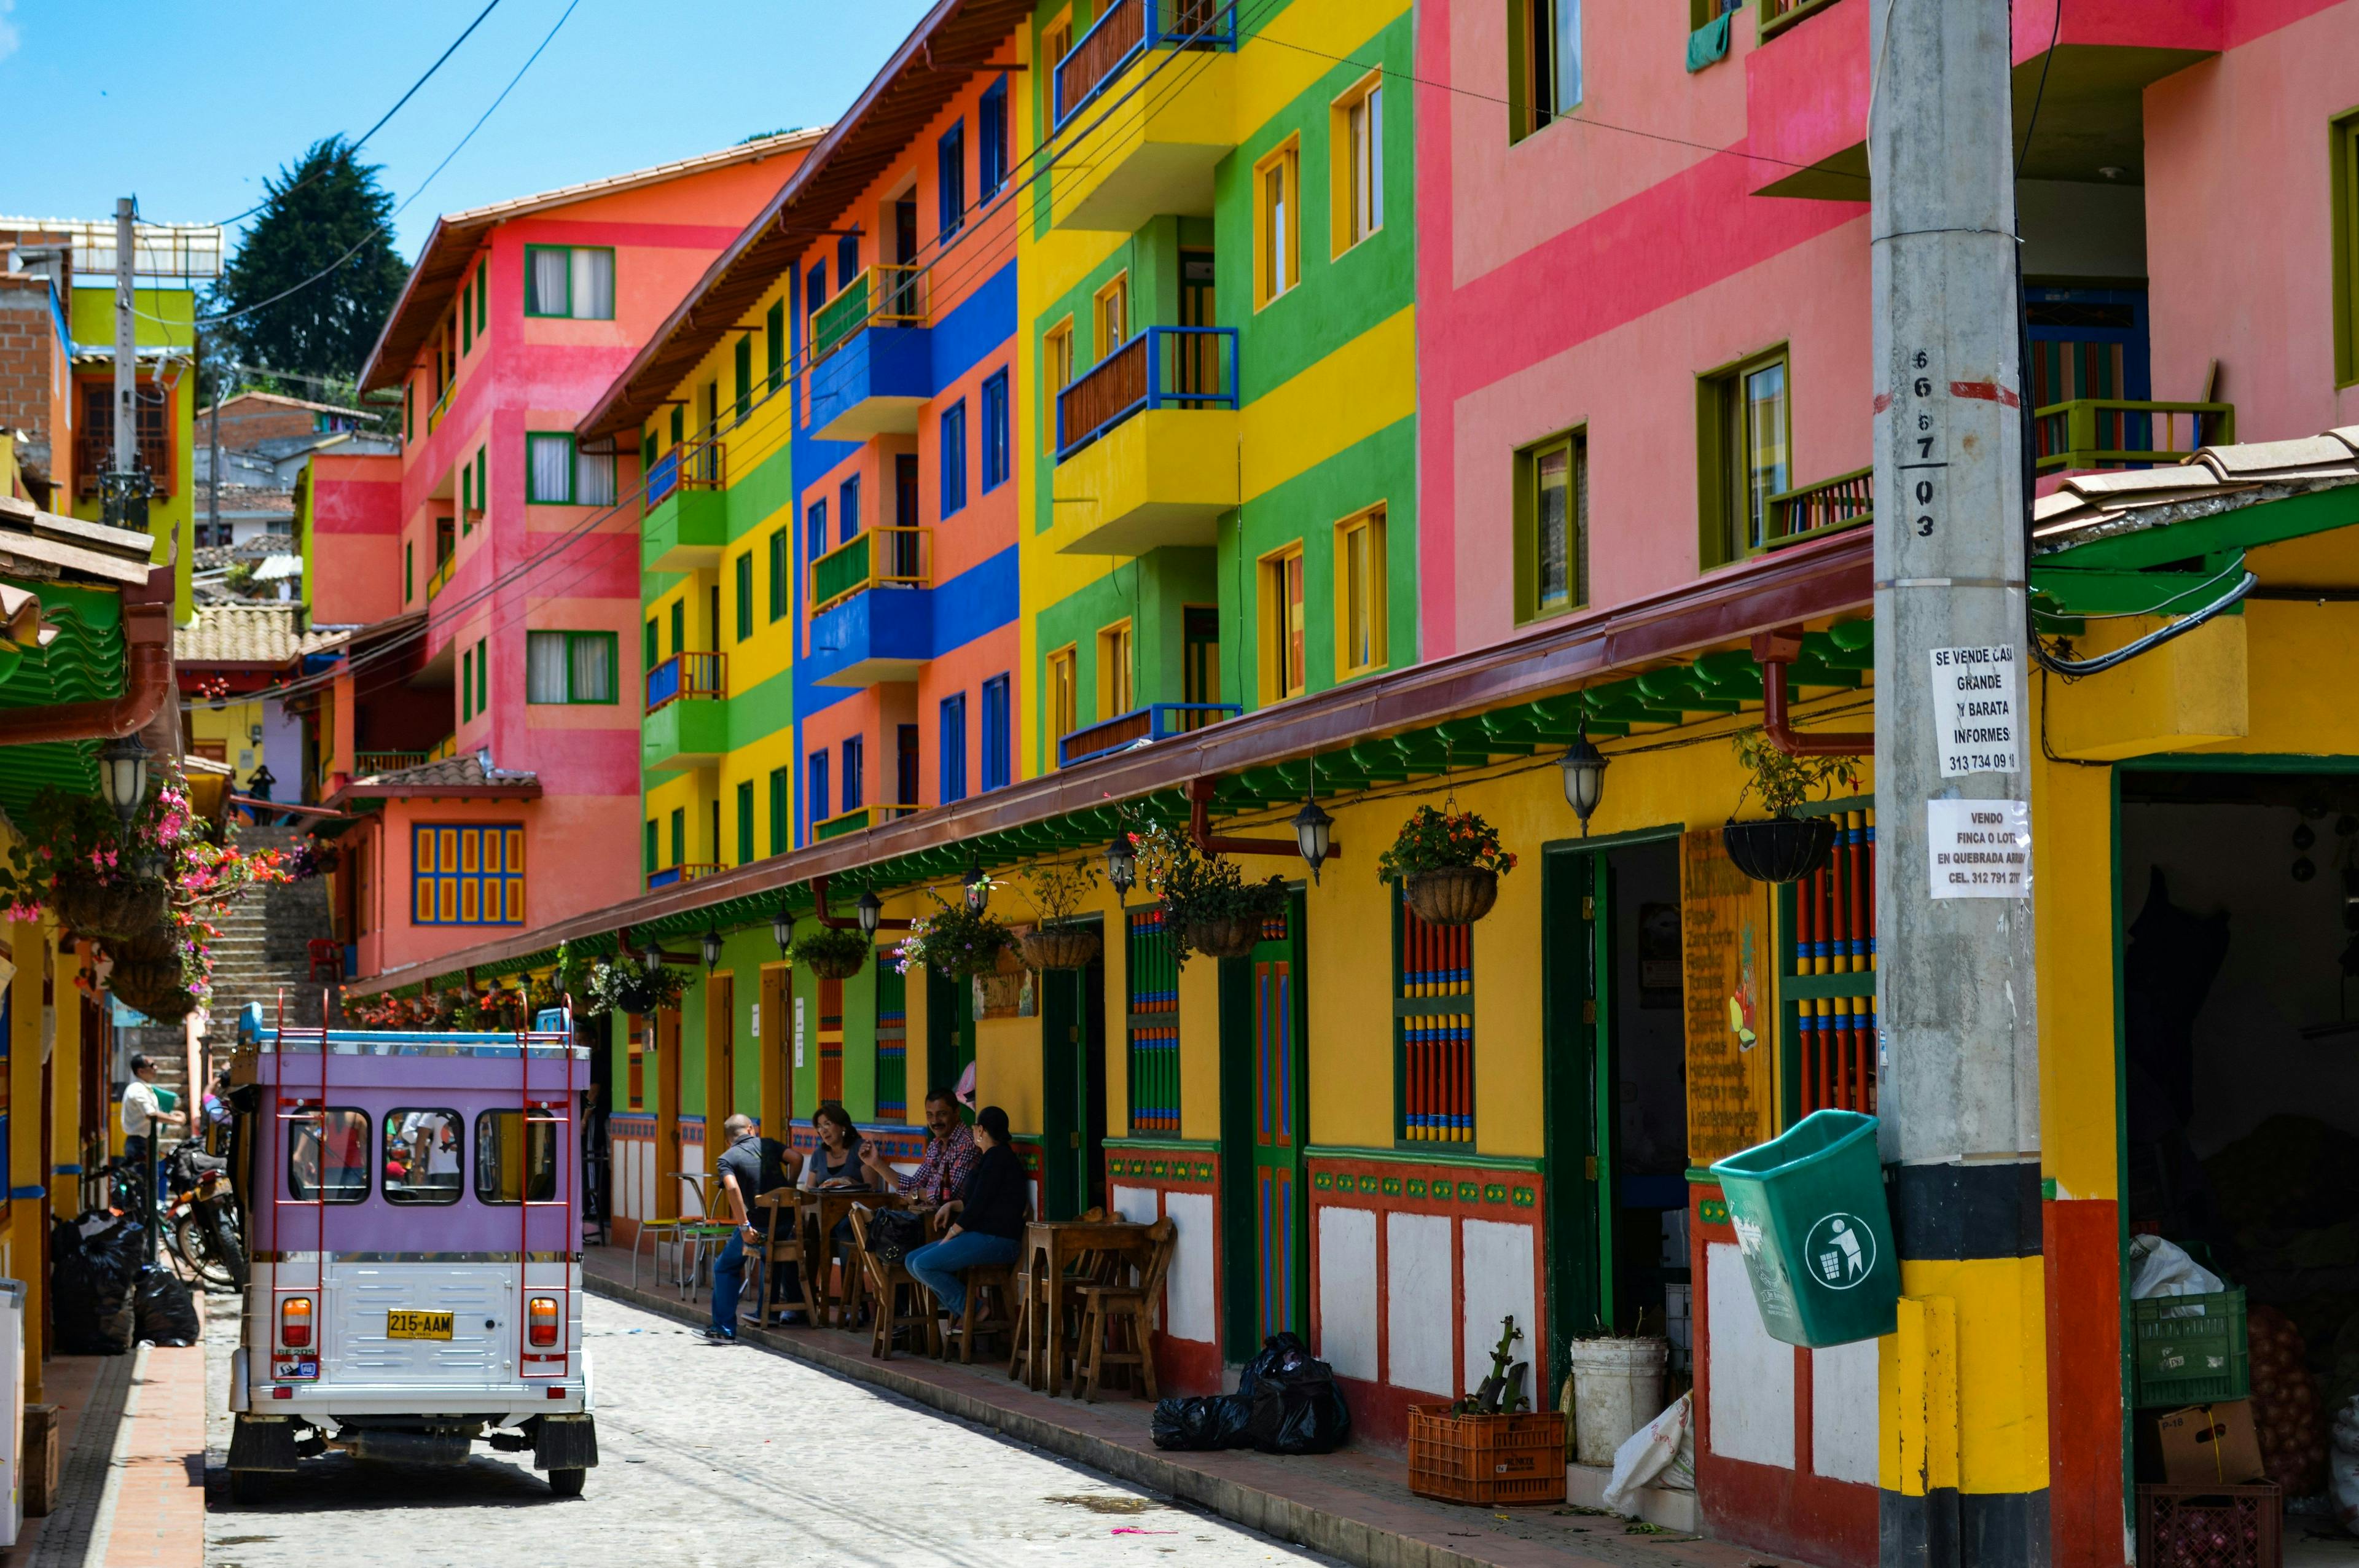 Colorful houses on the street in Colombia.